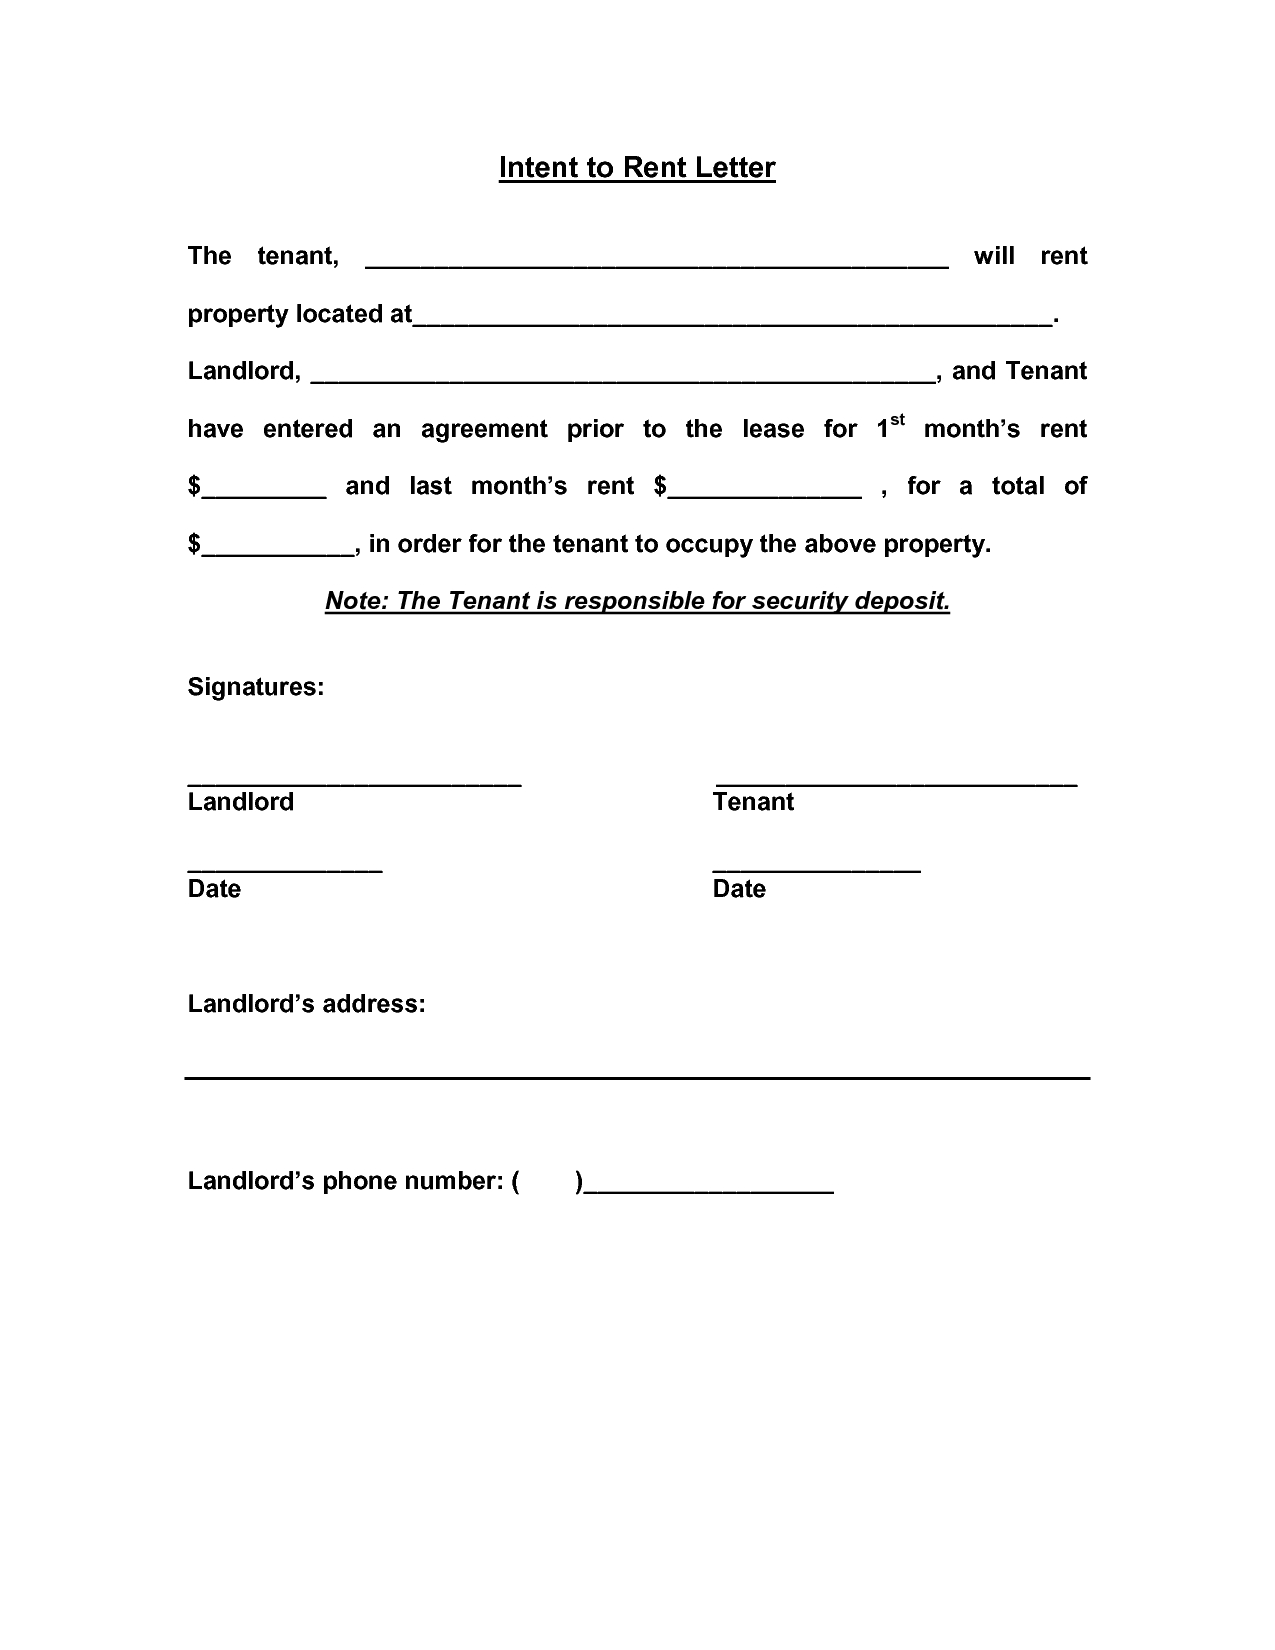 Letter Of Intent to Lease Commercial Property Template - Mercial Real Estate Lease Letter Intent Template Purchase